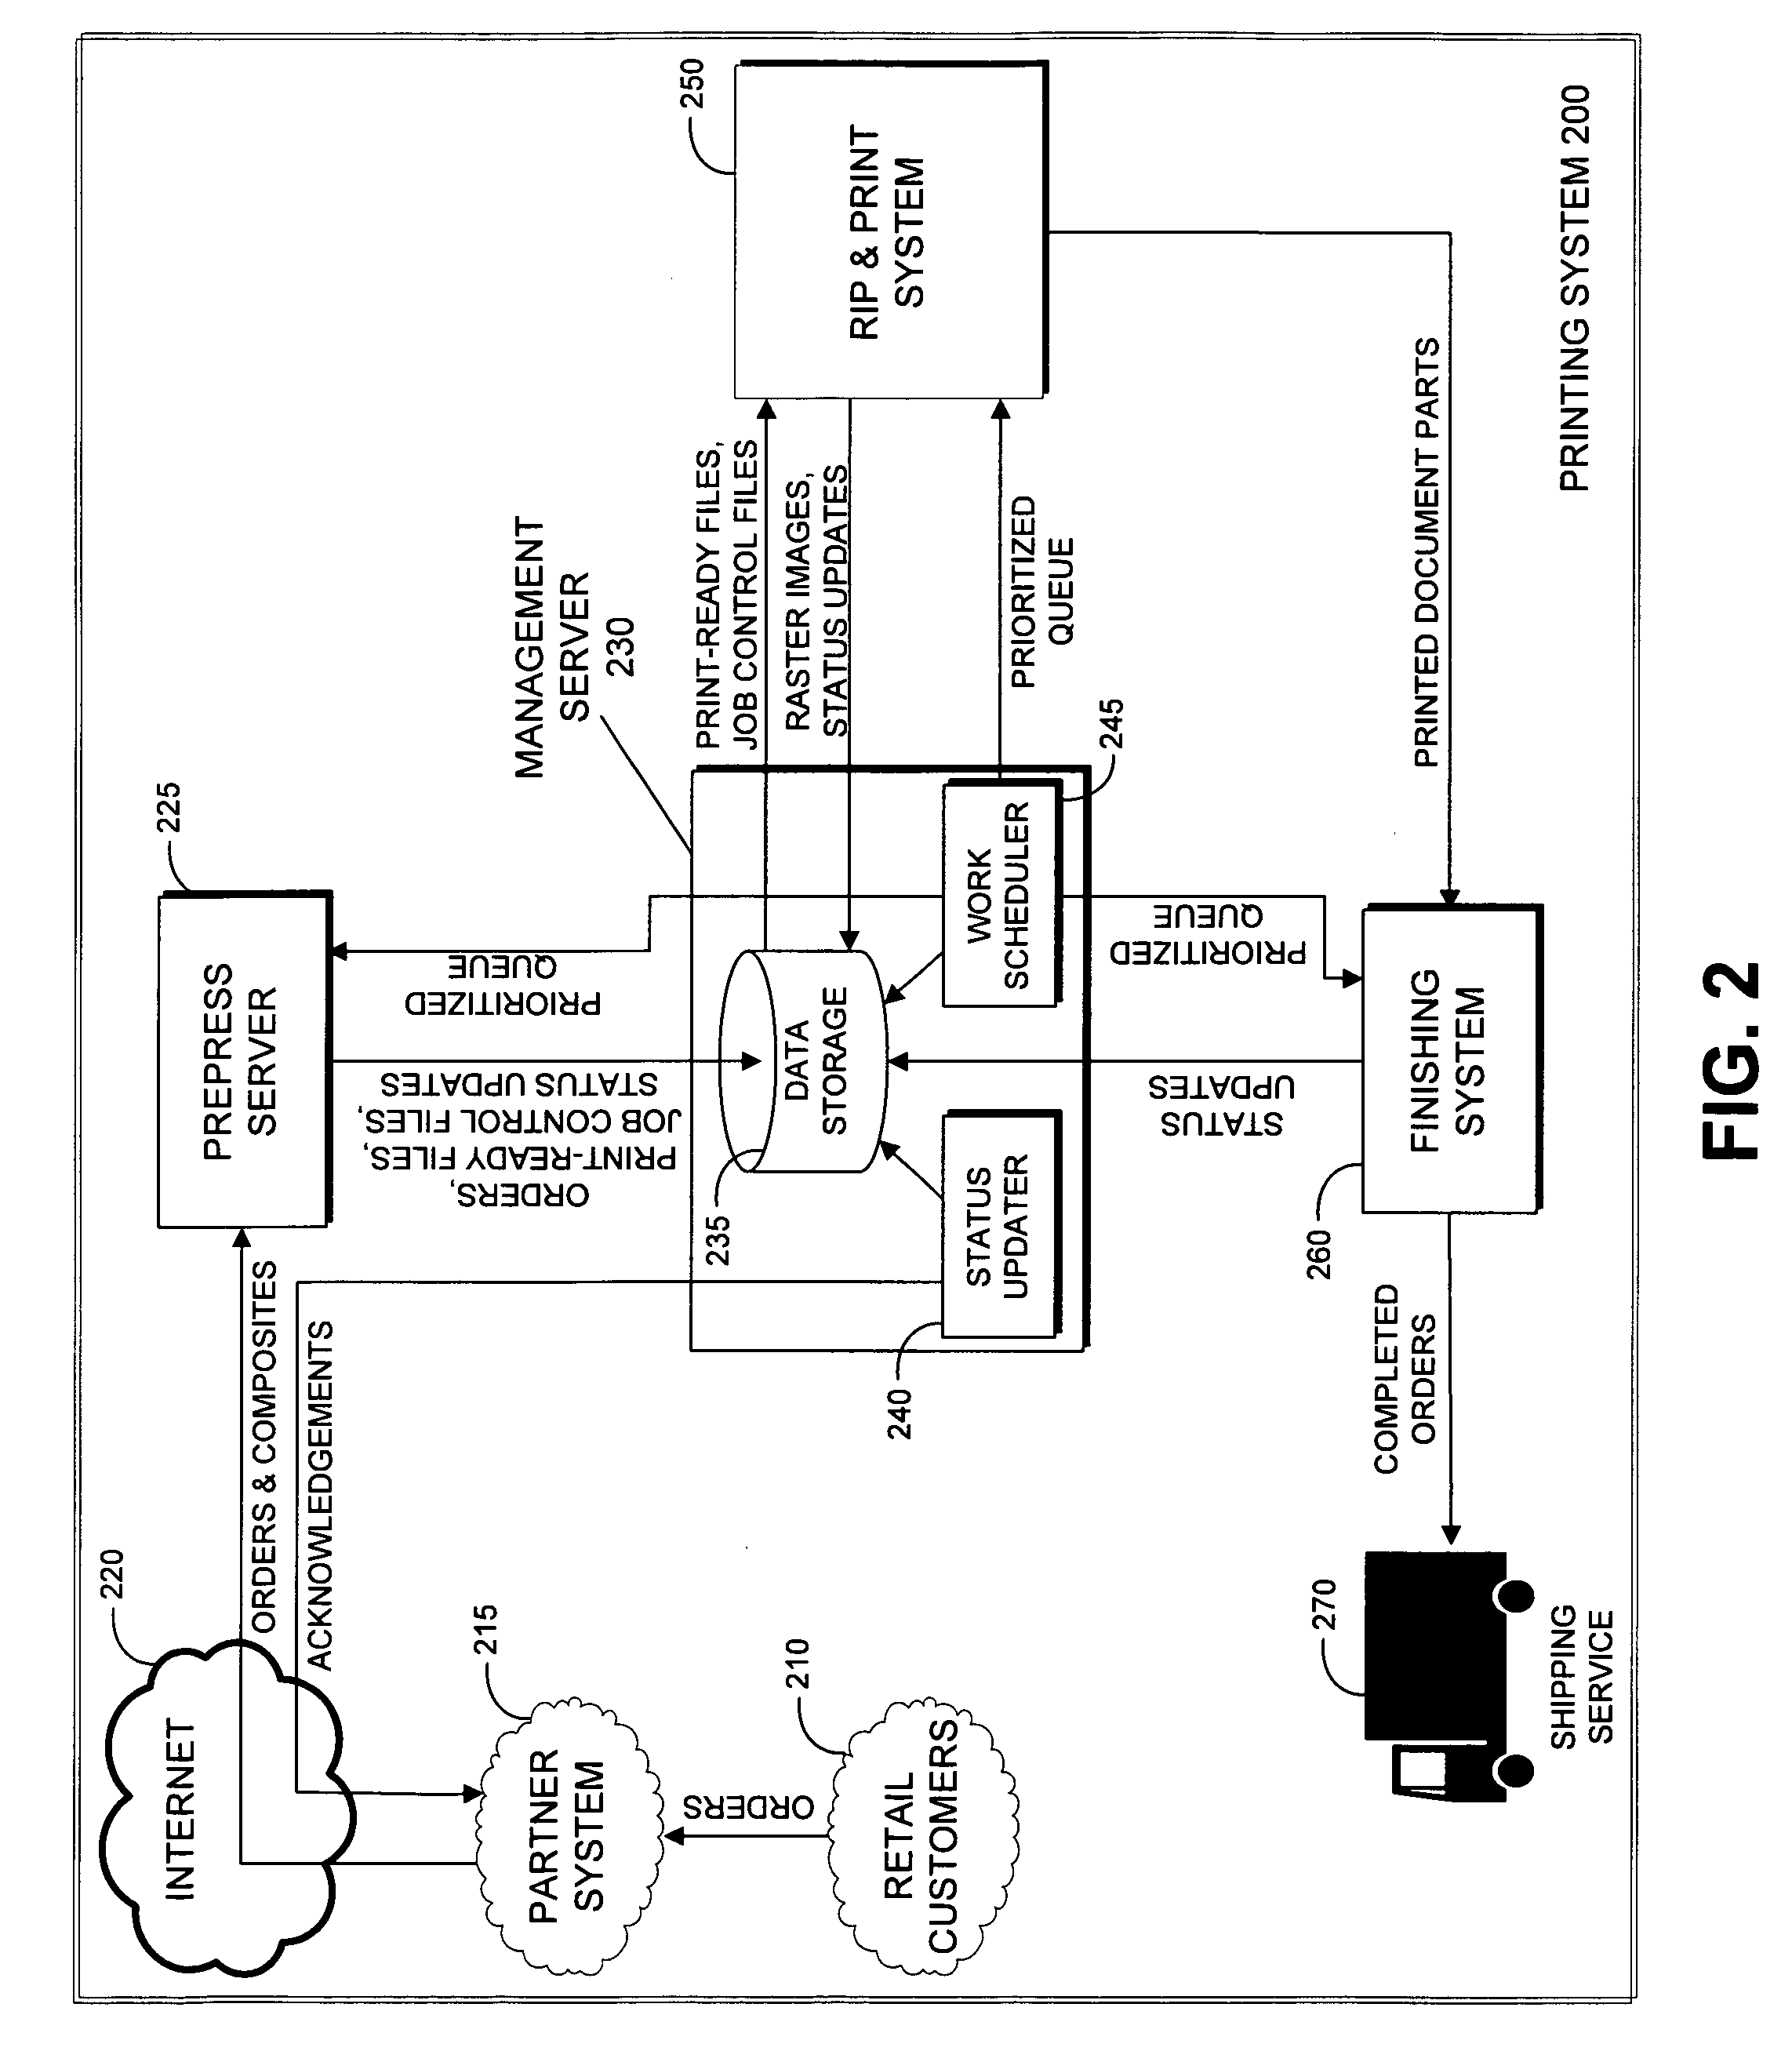 Multiproduct printing workflow system with dynamic scheduling